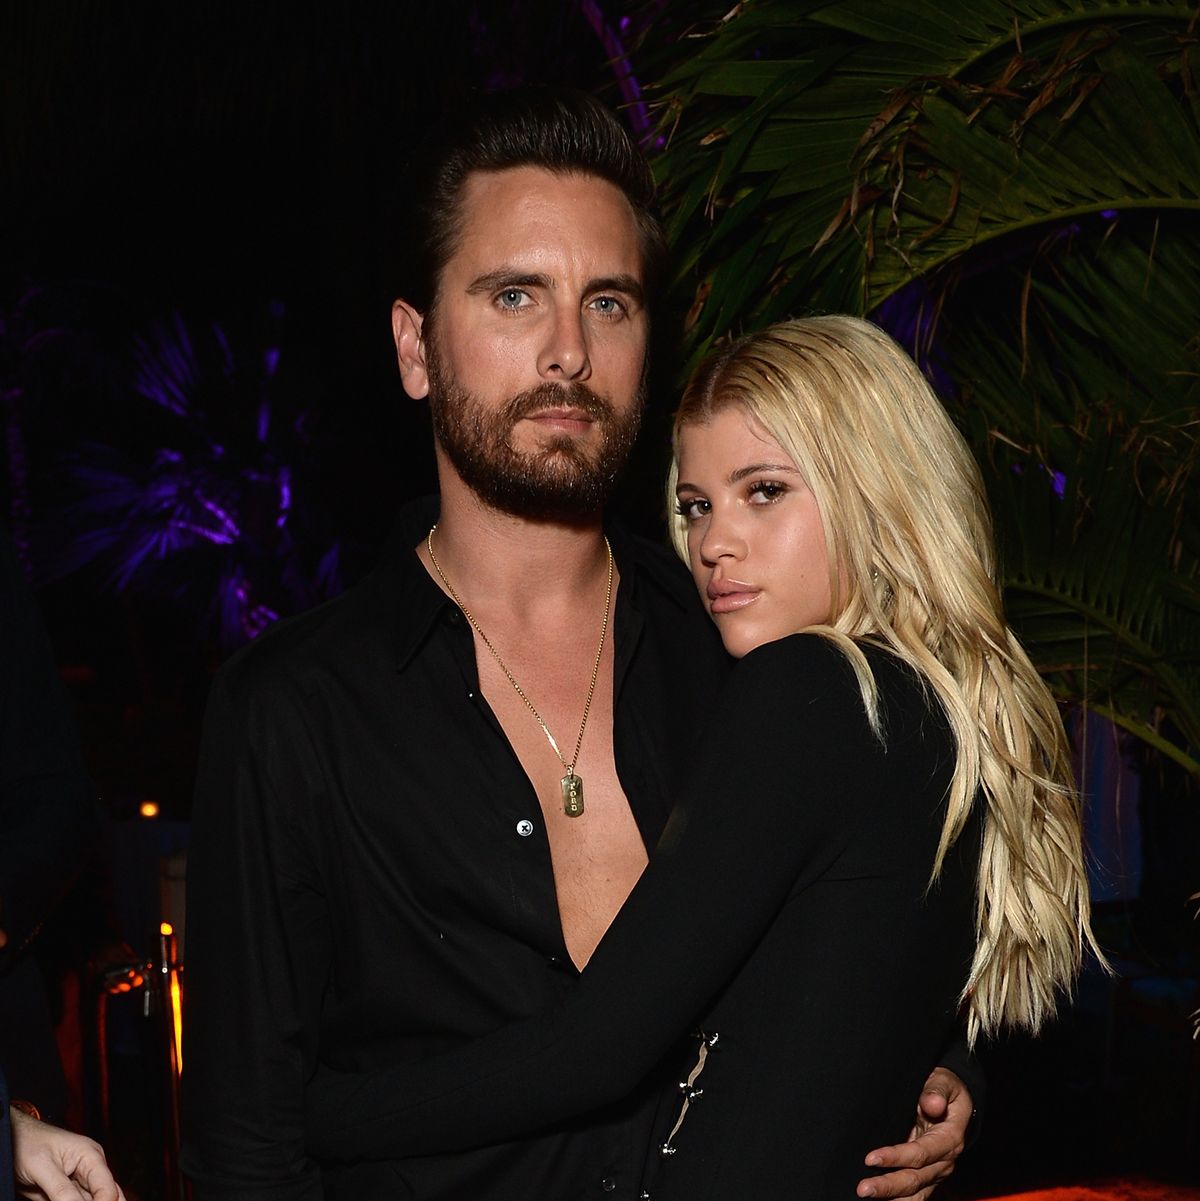 Sofia Richie and Scott Disick's Complete Relationship Timeline